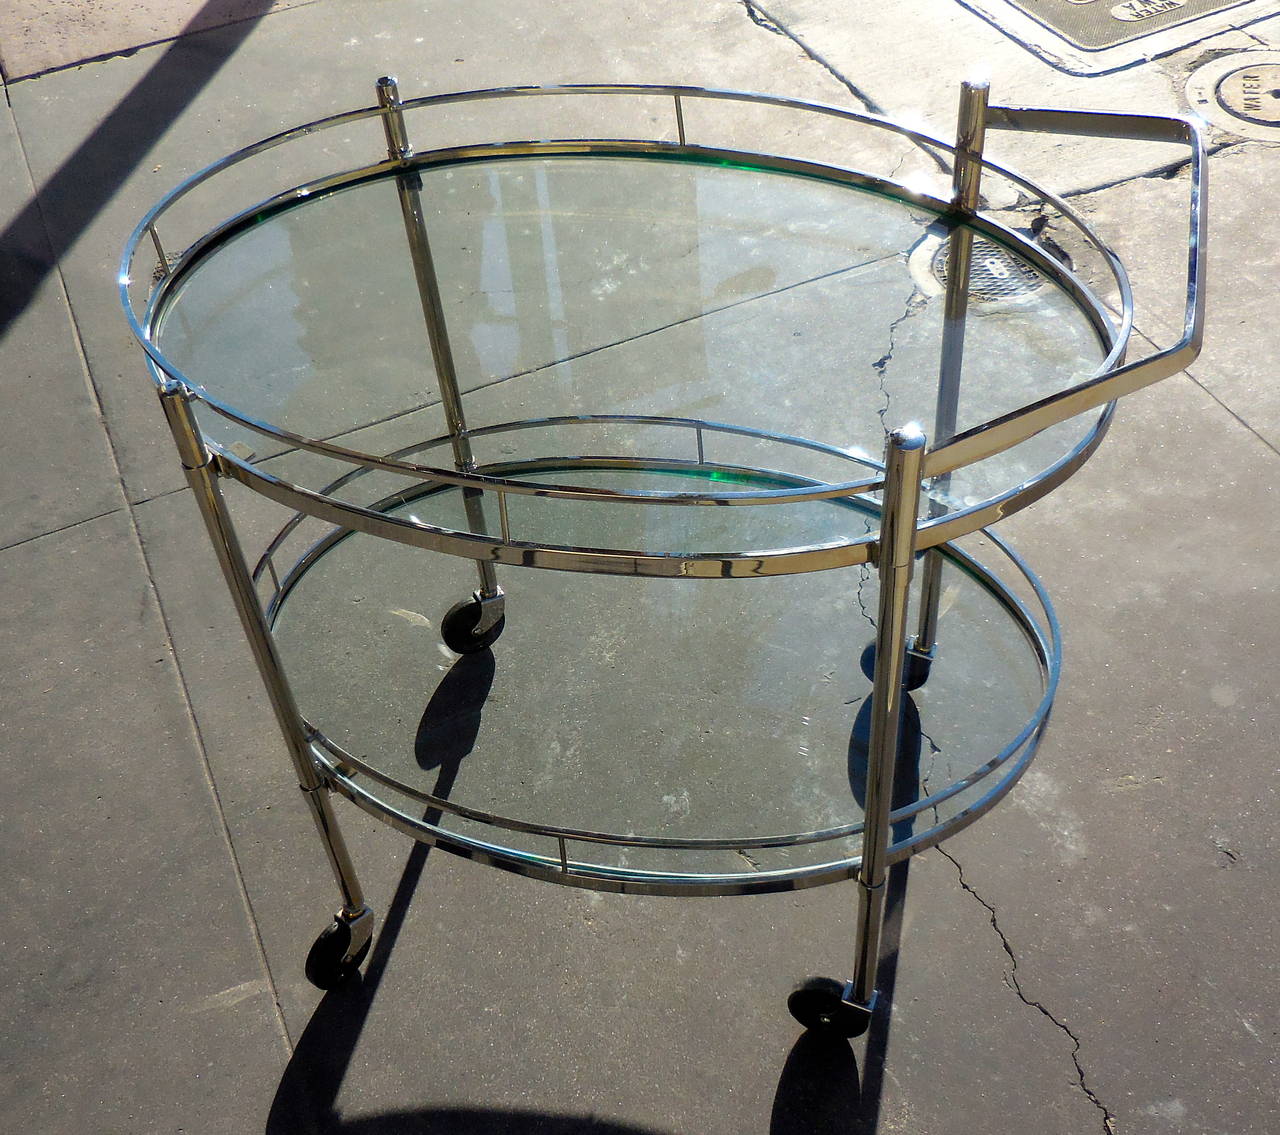 A nickel-plated oval two-tier serving or bar cart, attributed to the New York City firm of Maxwell-Phillips in the 1950s. The cart has recently been nickel-plated over solid brass and the glass shelves are new replacements. The handle is removable